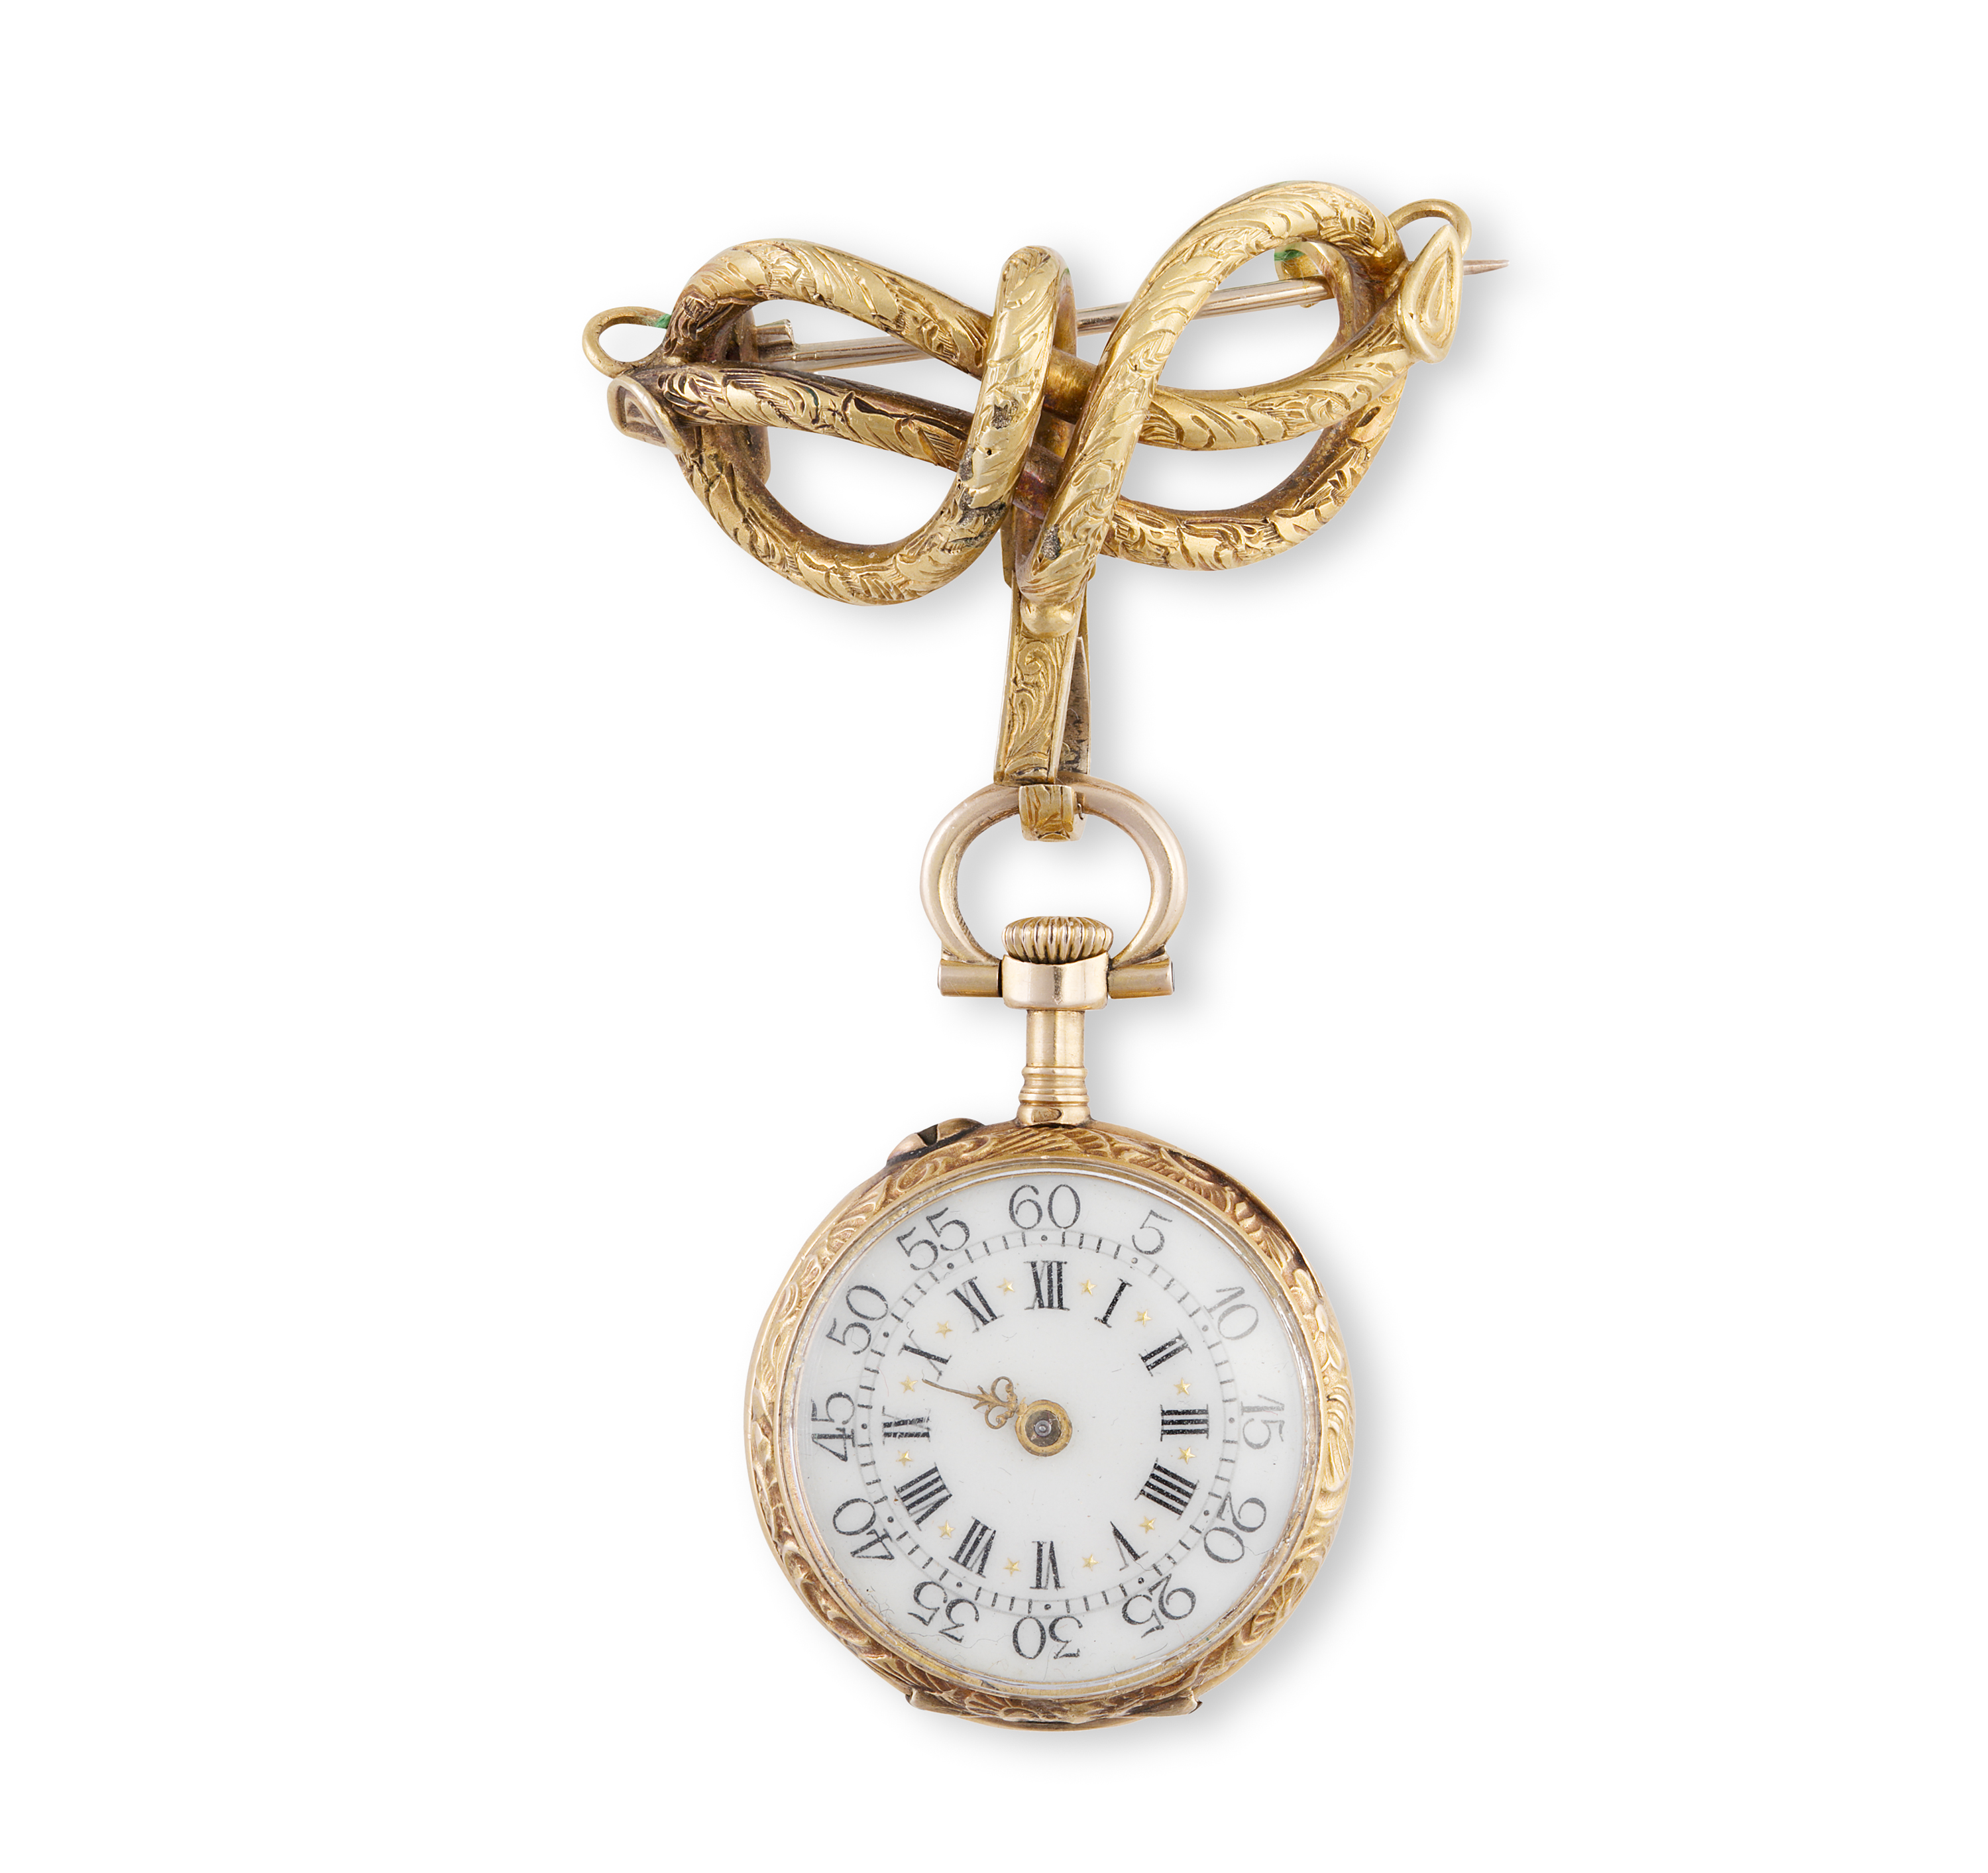 A LATE 19TH CENTURY FRENCH LADIES GOLD AND DIAMOND POCKET WATCH, suspended from an engraved and